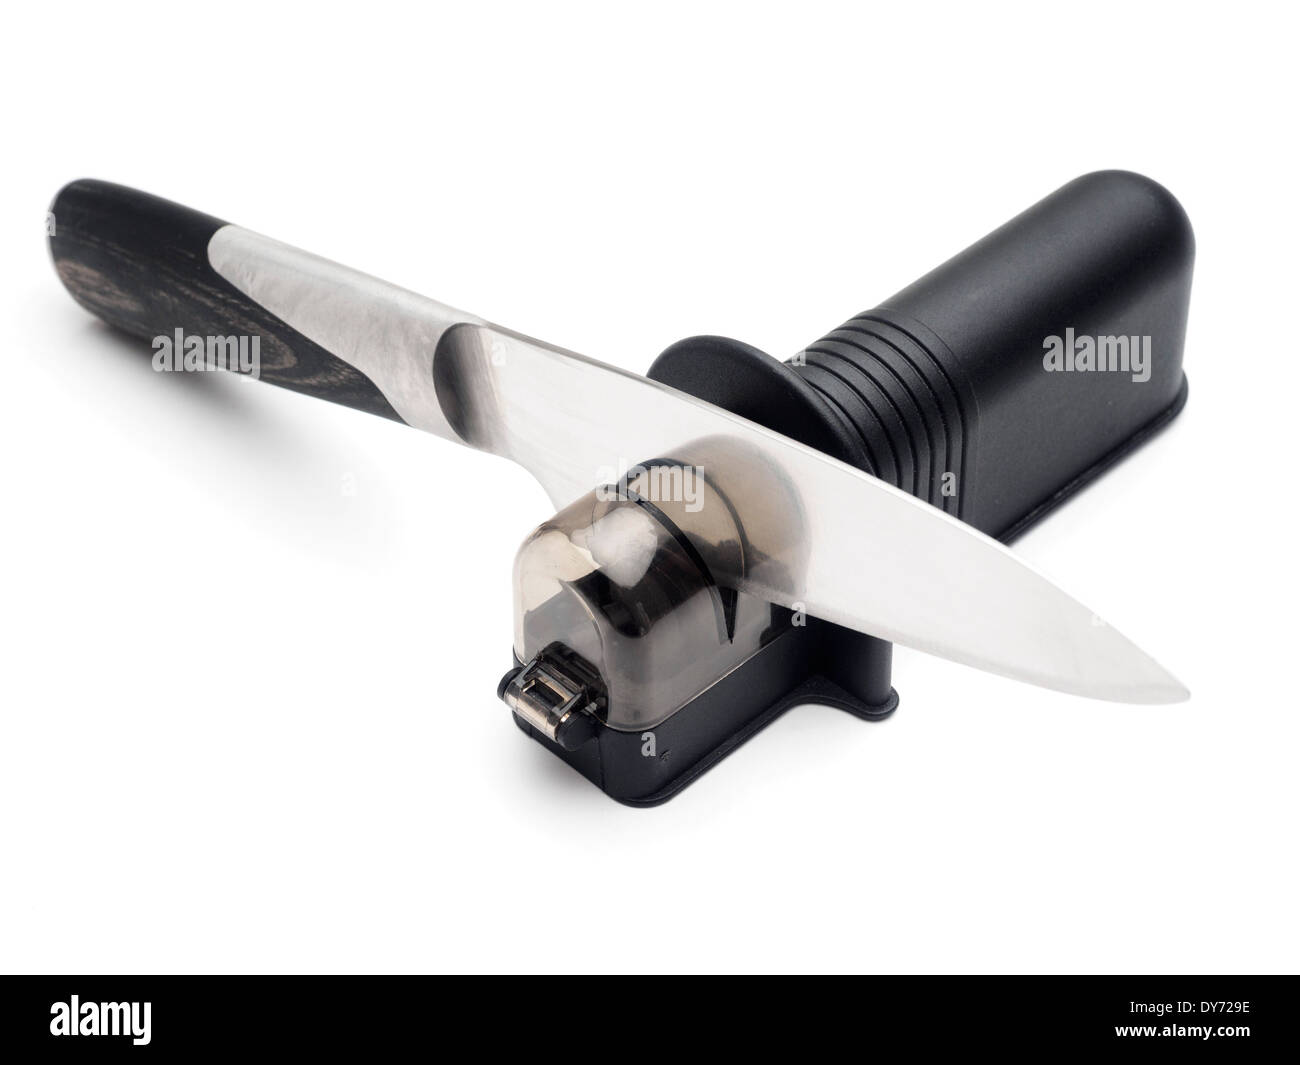 https://c8.alamy.com/comp/DY729E/kitchen-knife-on-knife-sharpener-cut-out-isolated-on-white-background-DY729E.jpg